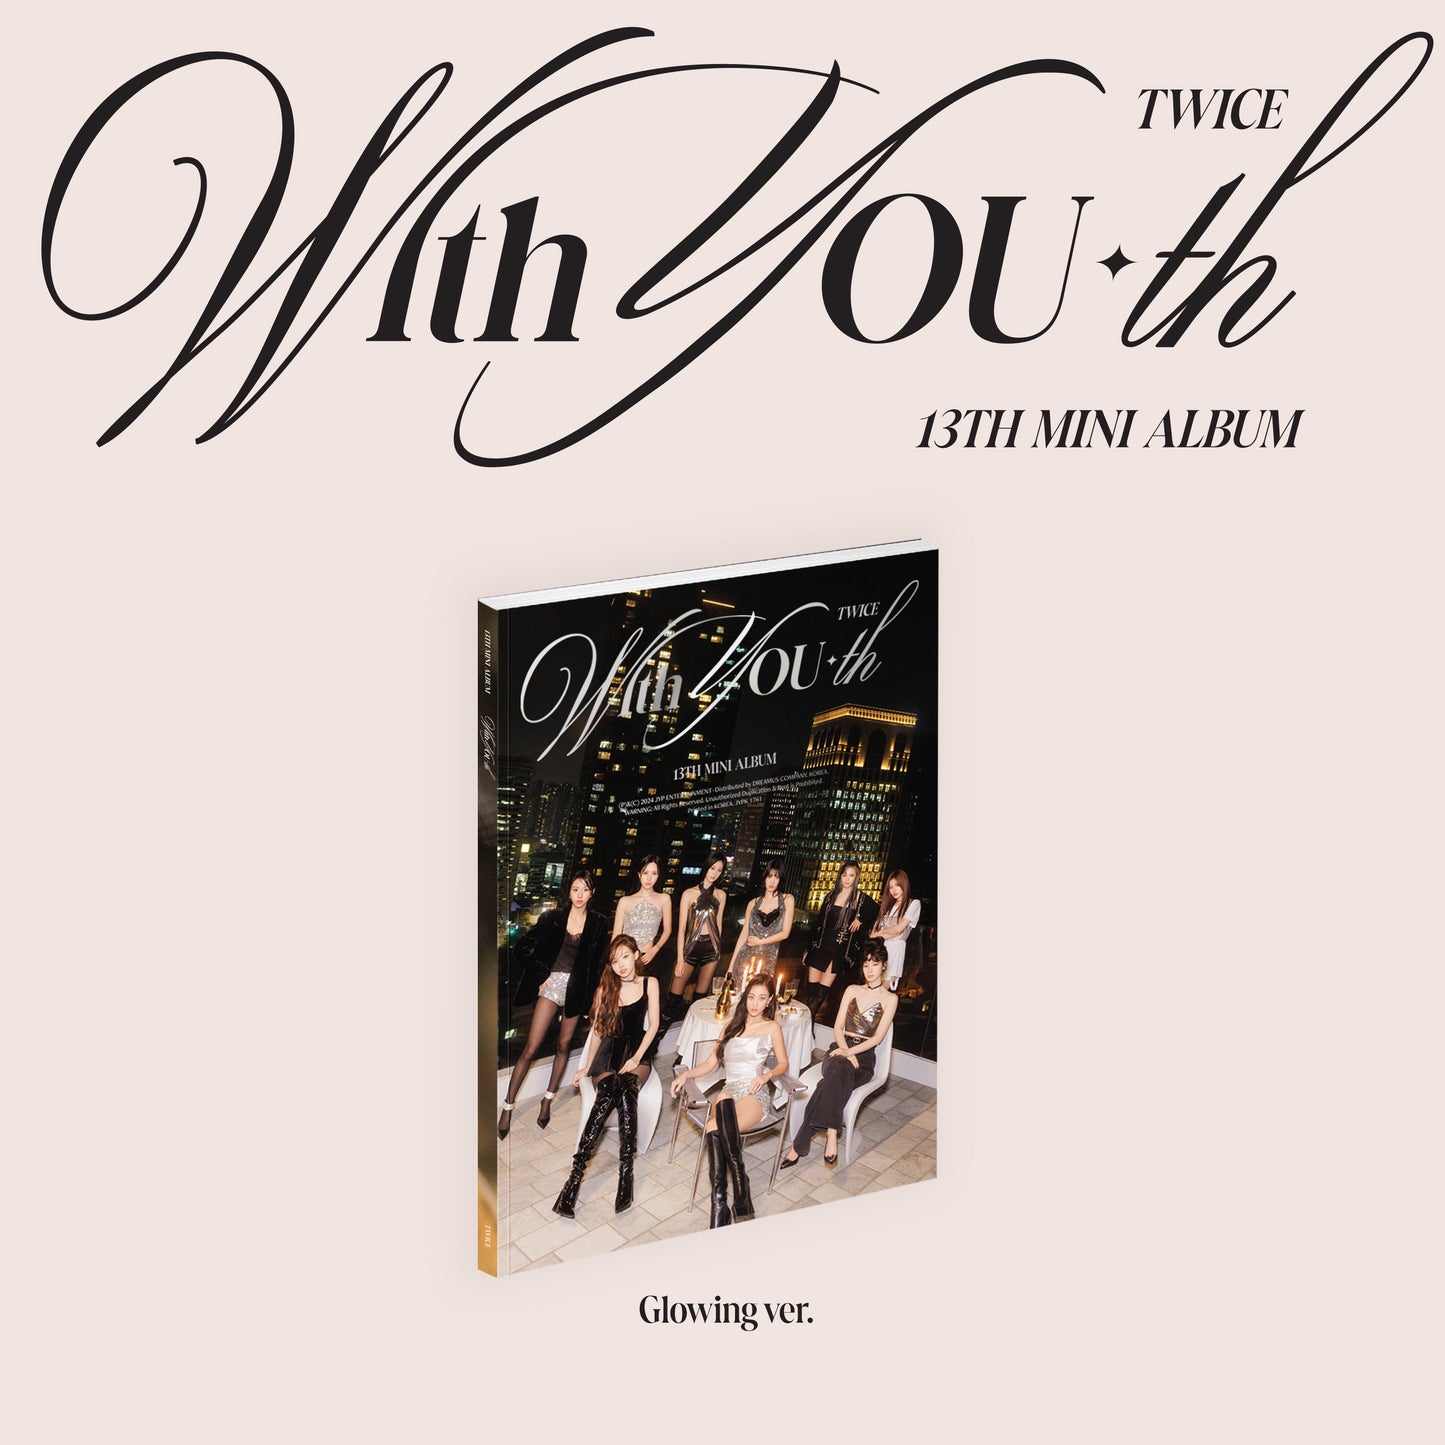 TWICE 13TH MINI ALBUM 'WITH YOU-TH' GLOWING VERSION COVER